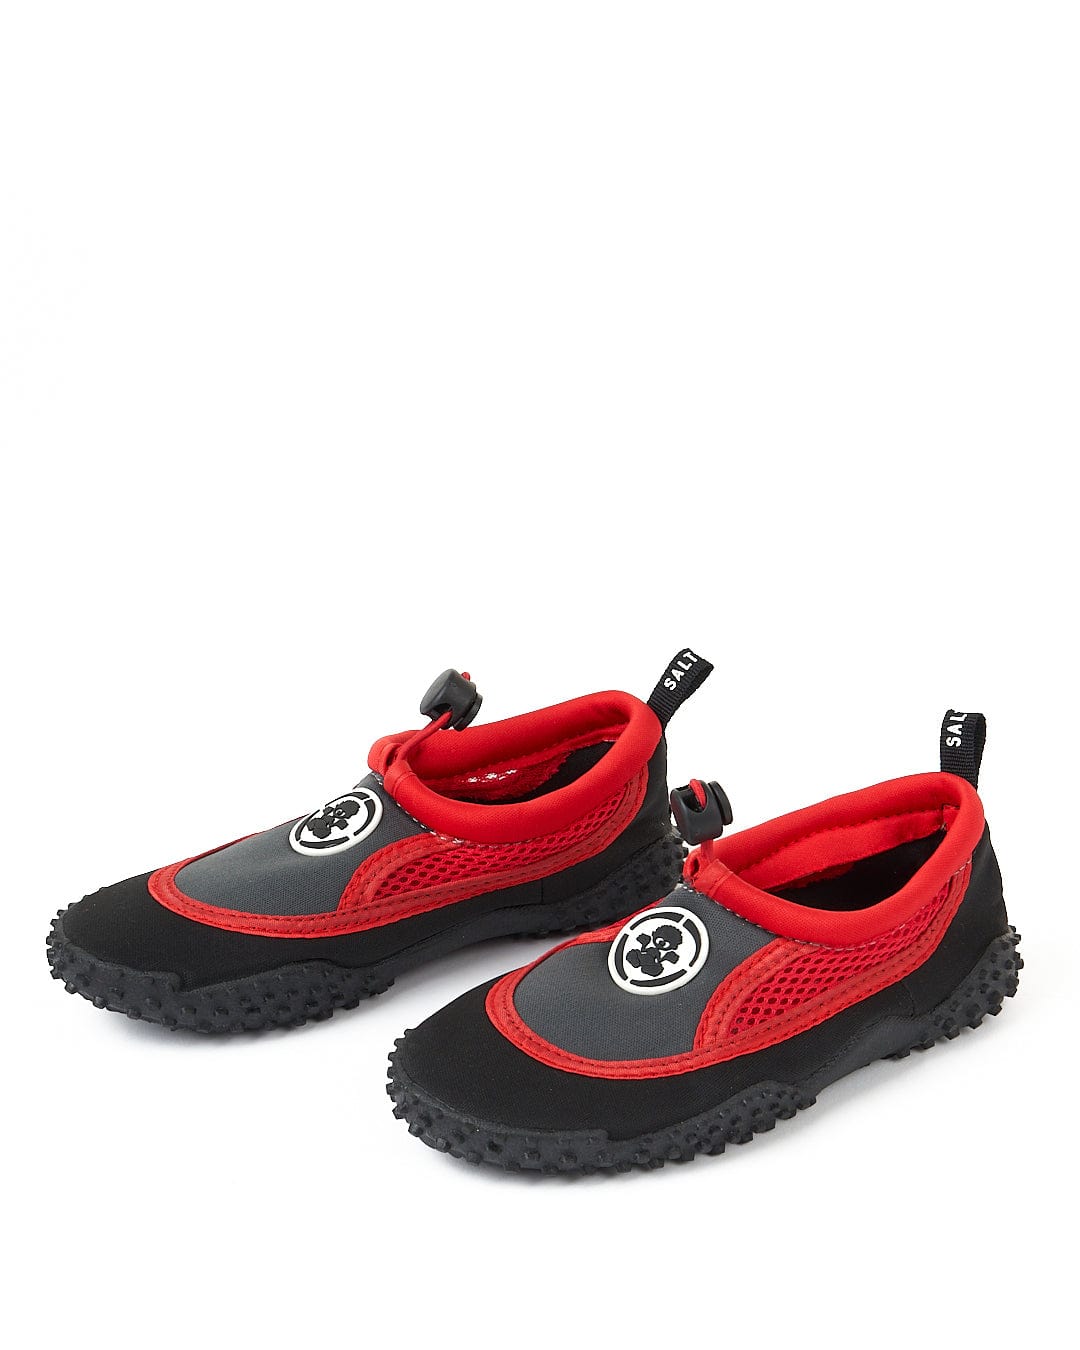 A pair of black and red Saltrock neoprene water shoes, called Tok - Kids Aqua Shoes - Red.